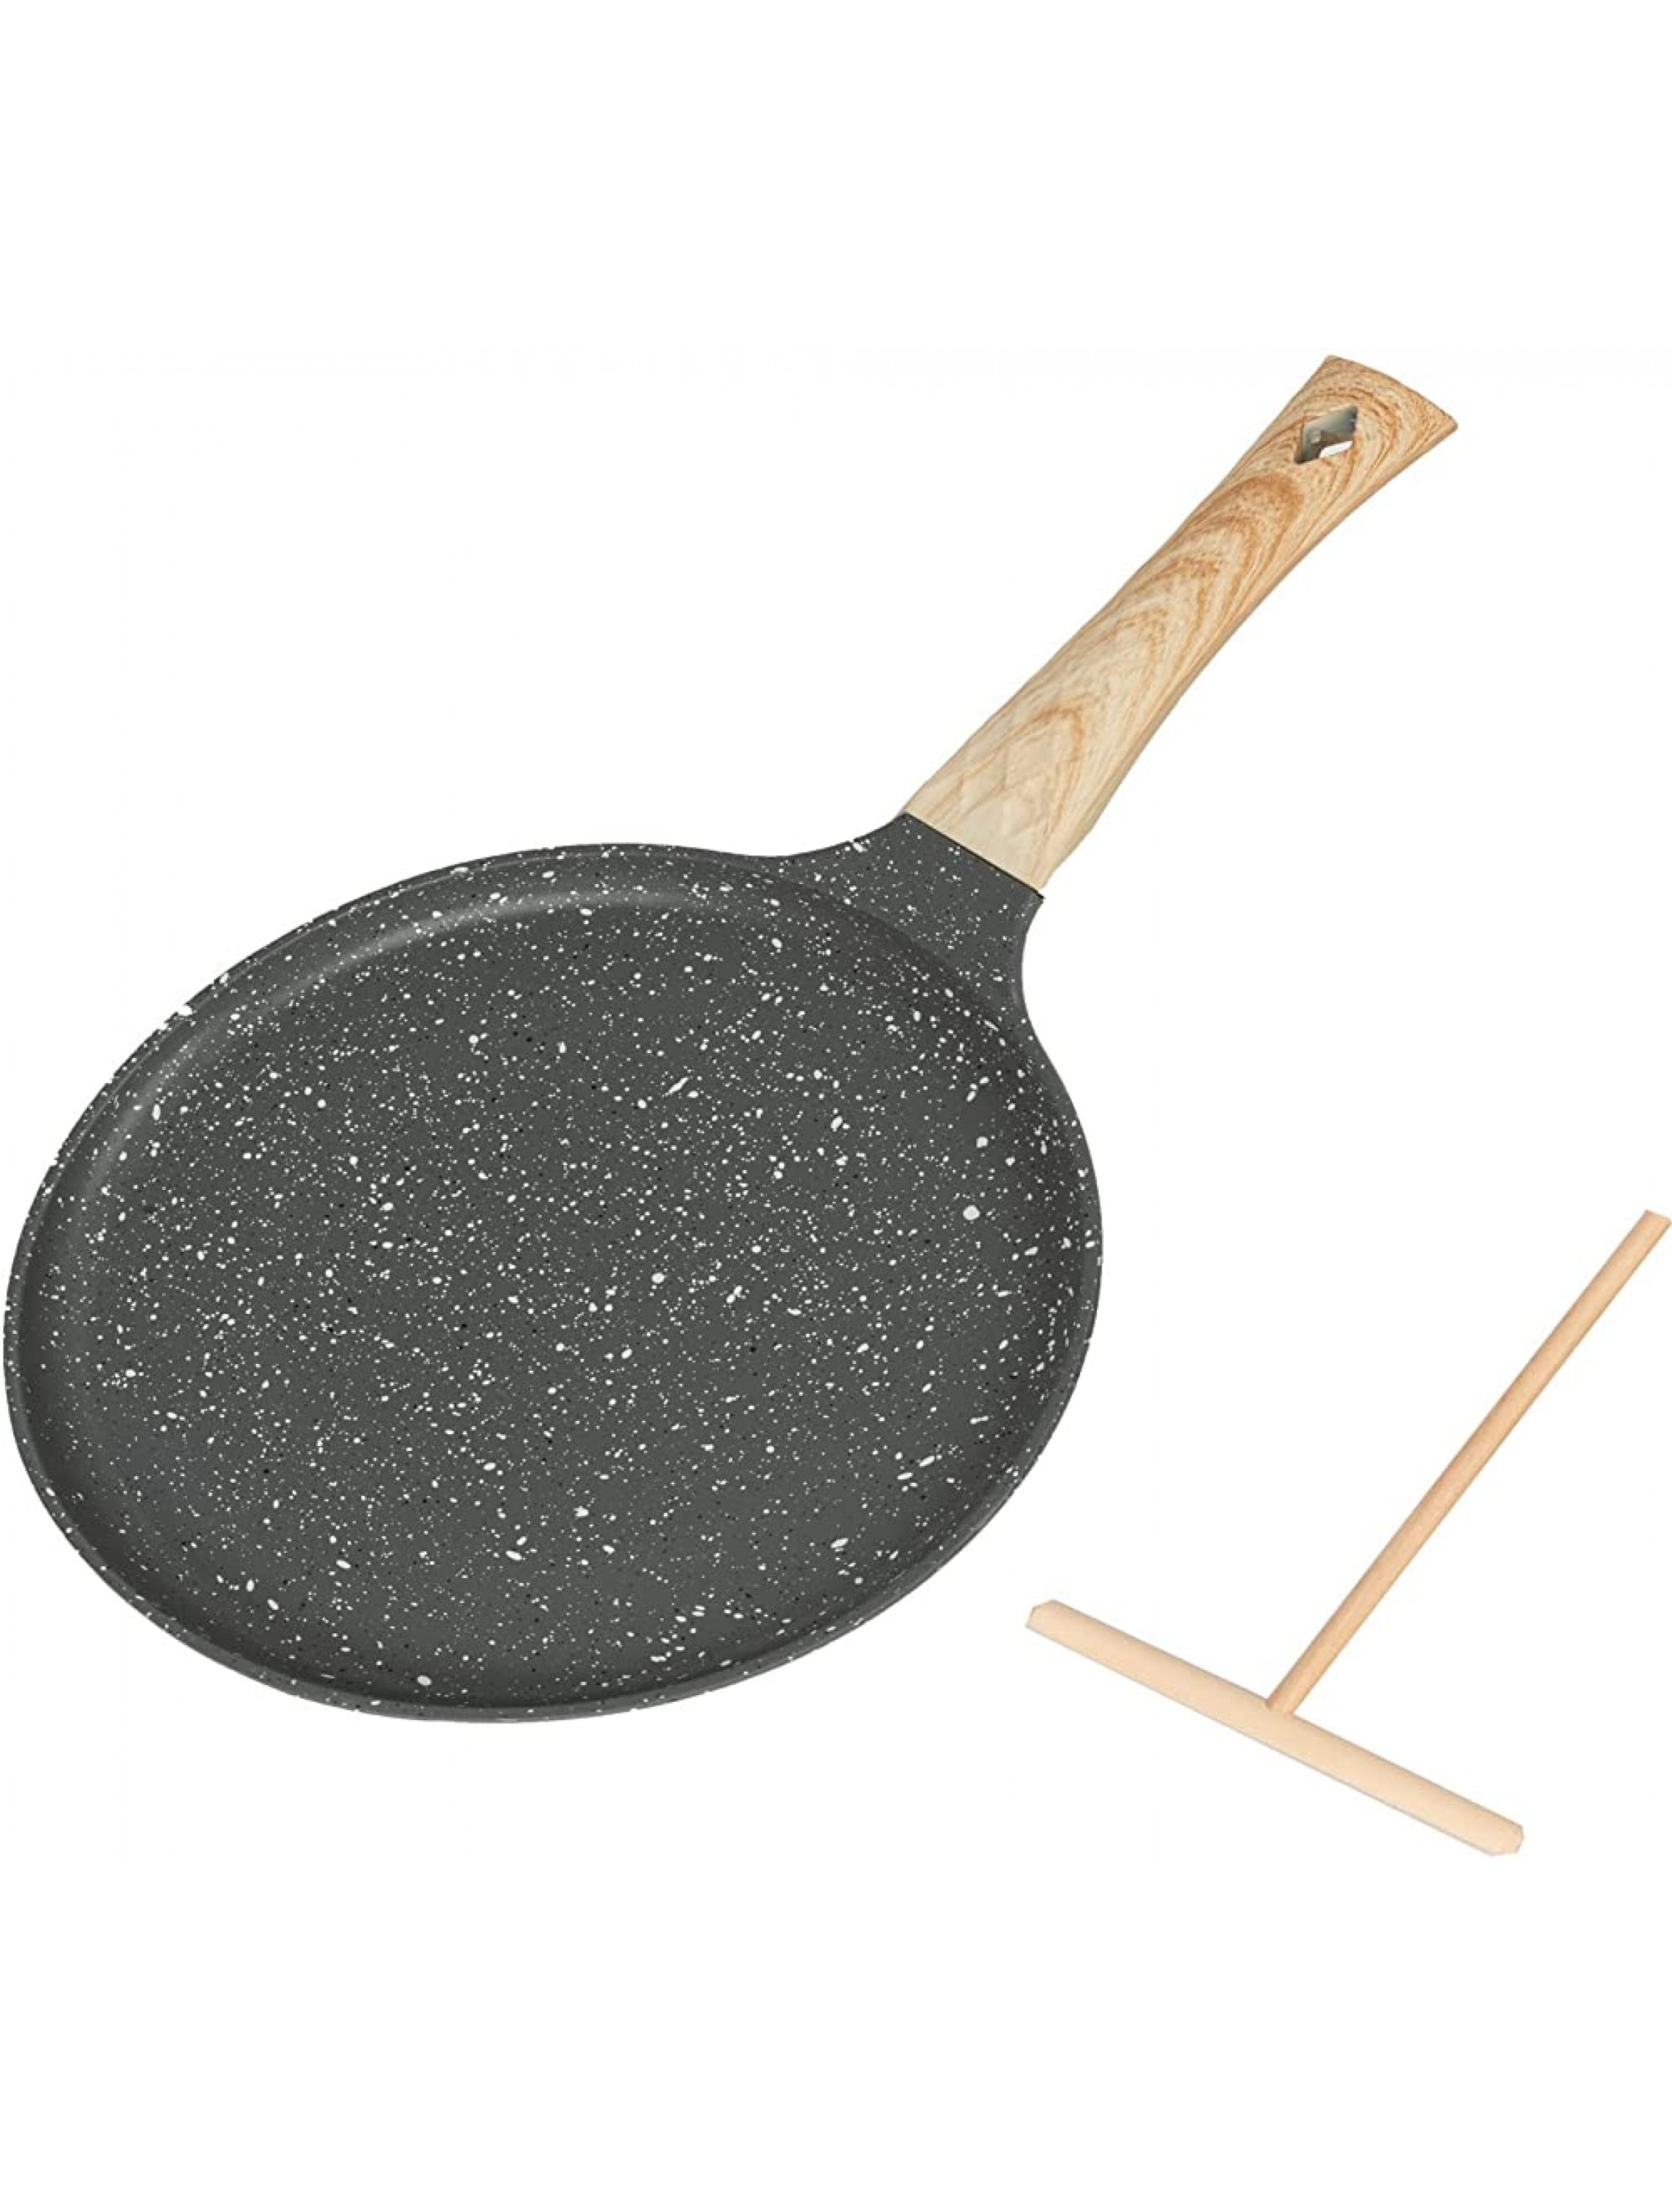 9.5 Inch Nonstick Crepe Pan with Spreader Induction Compatible PFOA & PTFEs Free - BZ95J044K